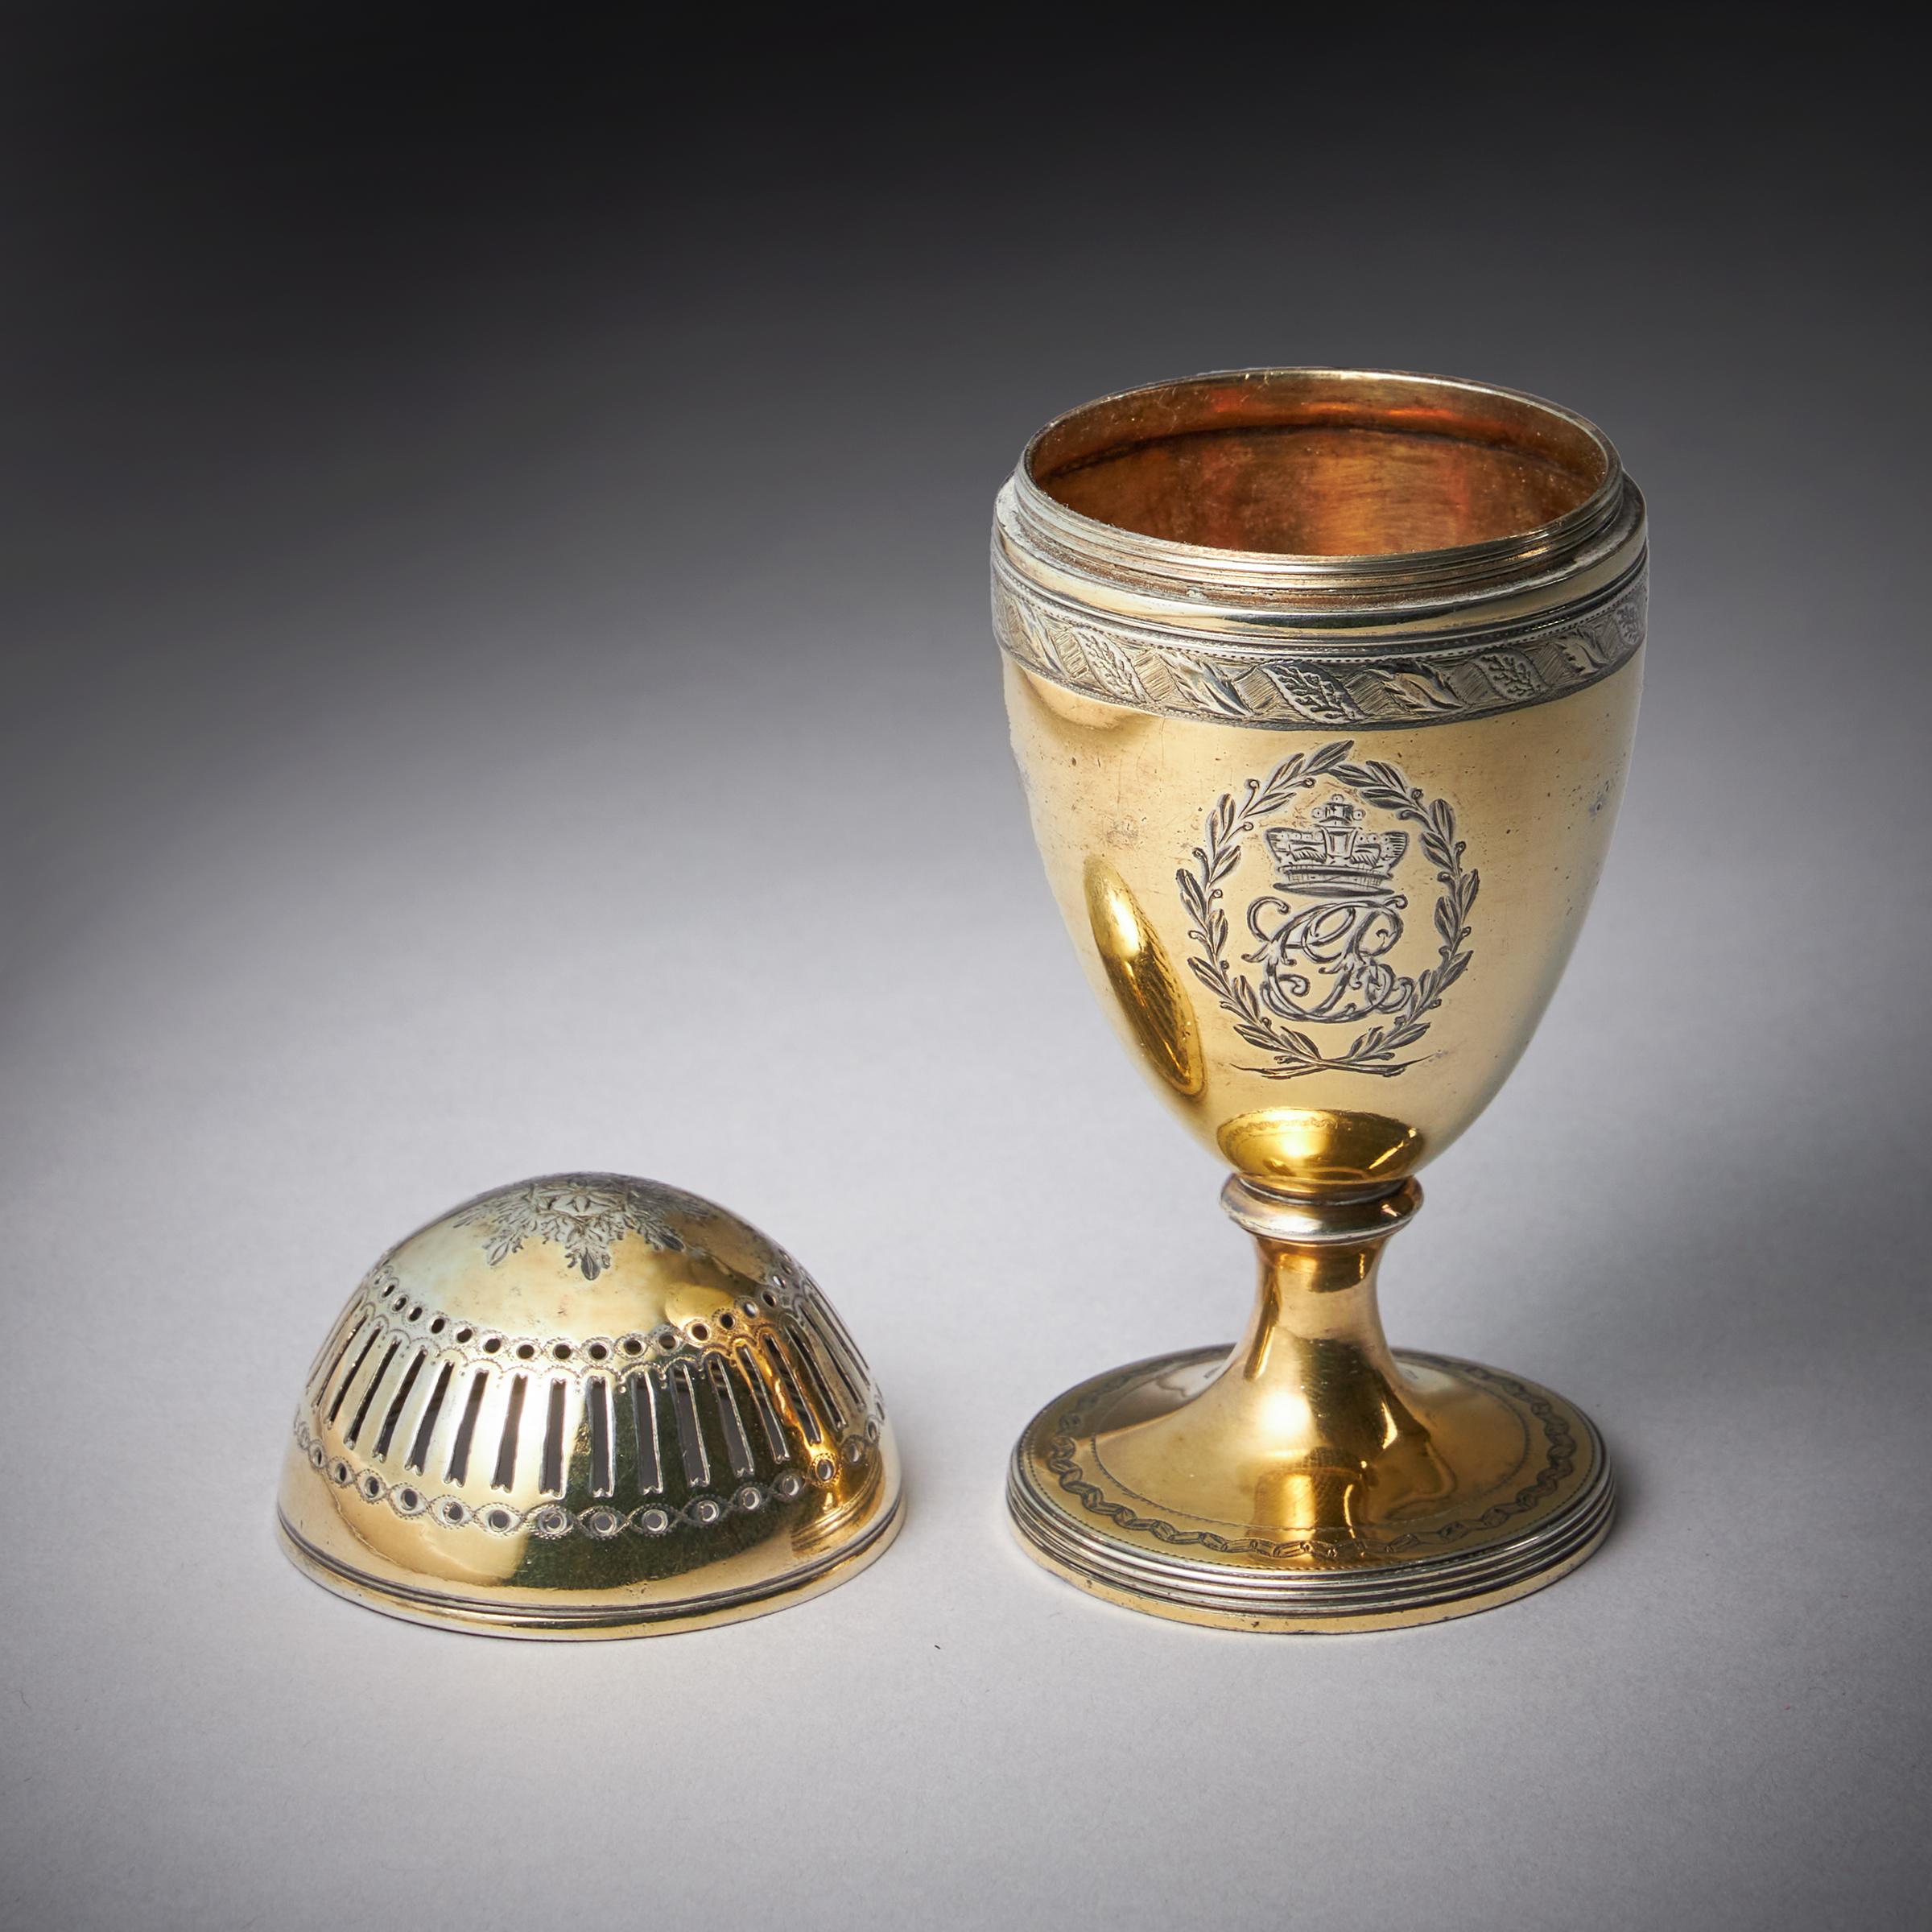 George III Silver-Gilt Pepper Pot with the Royal Cypher of Queen Charlotte, 1798 13